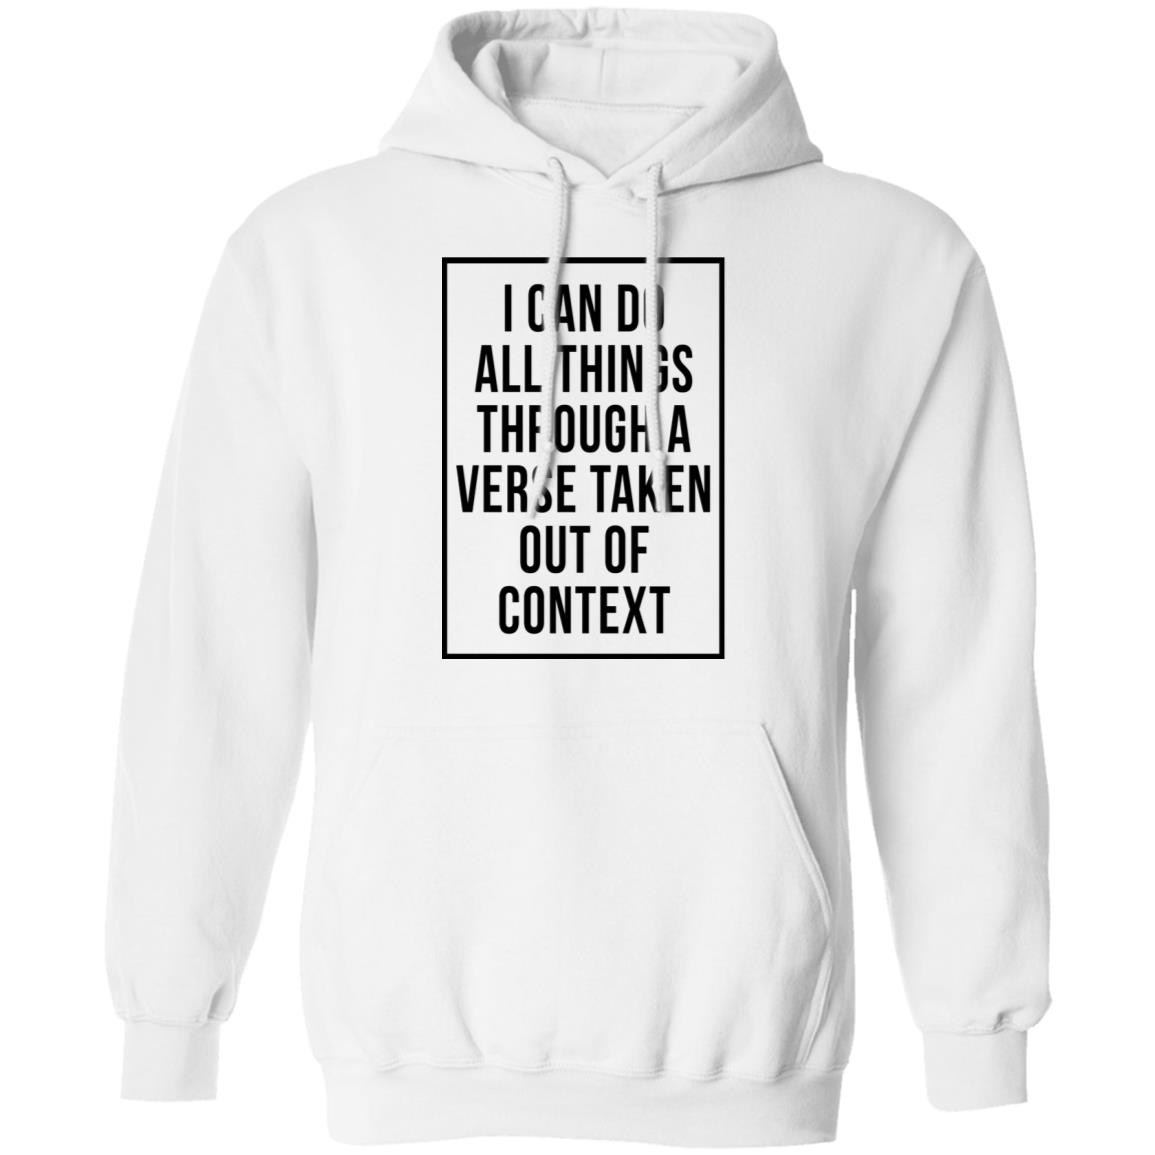 I Can Do All Things Through A Verse Taken Out Of Context Shirt ...